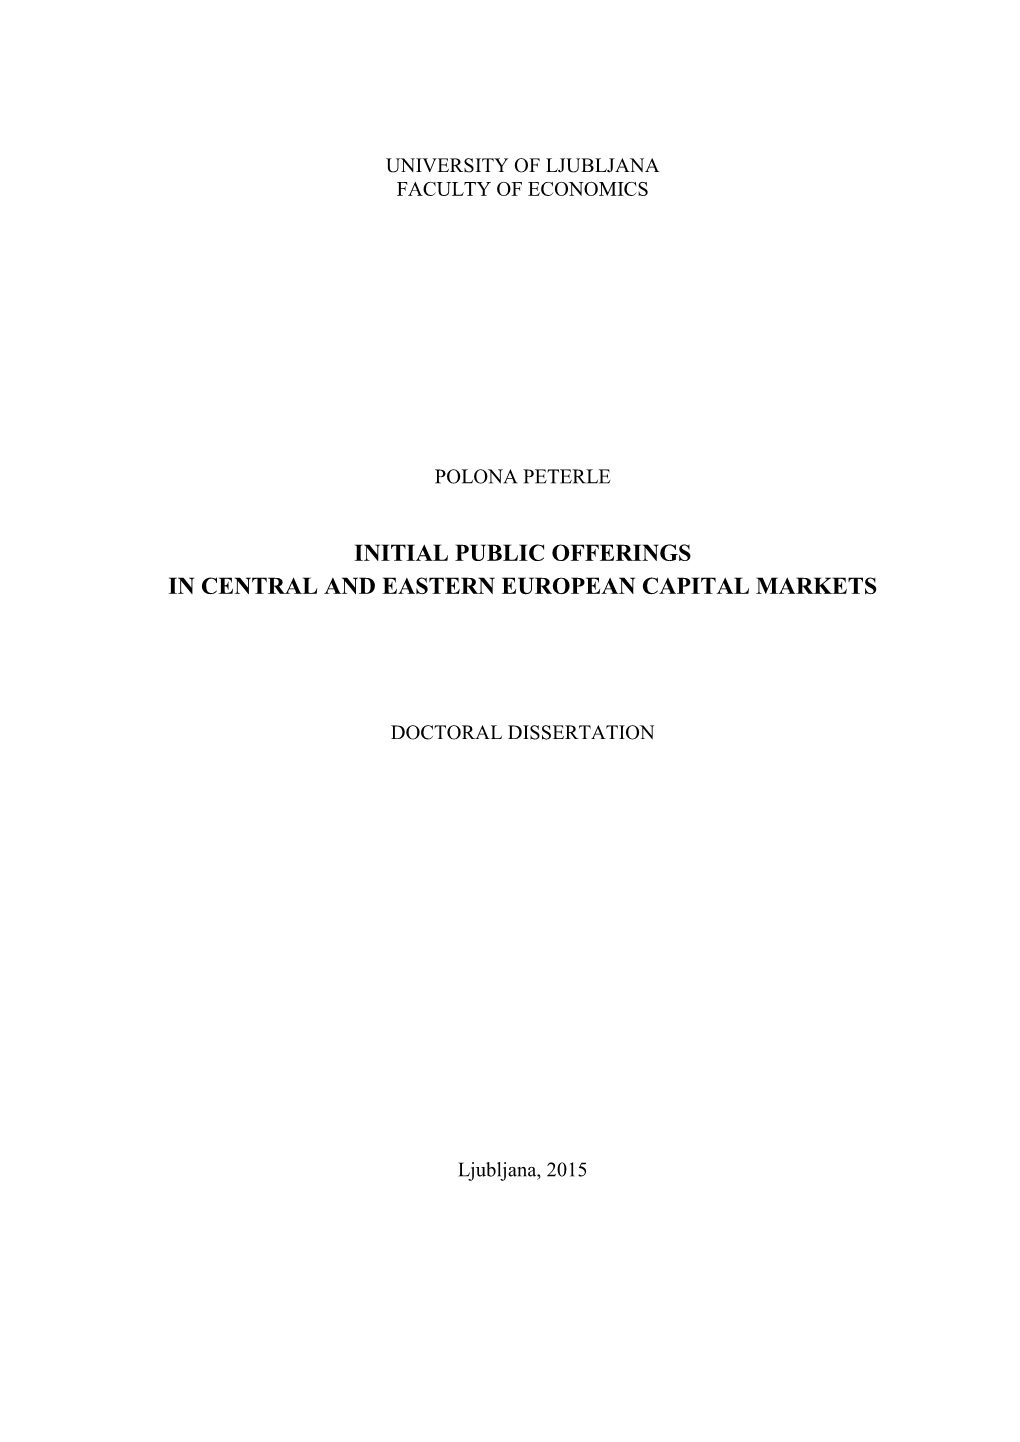 Initial Public Offerings in Central and Eastern European Capital Markets